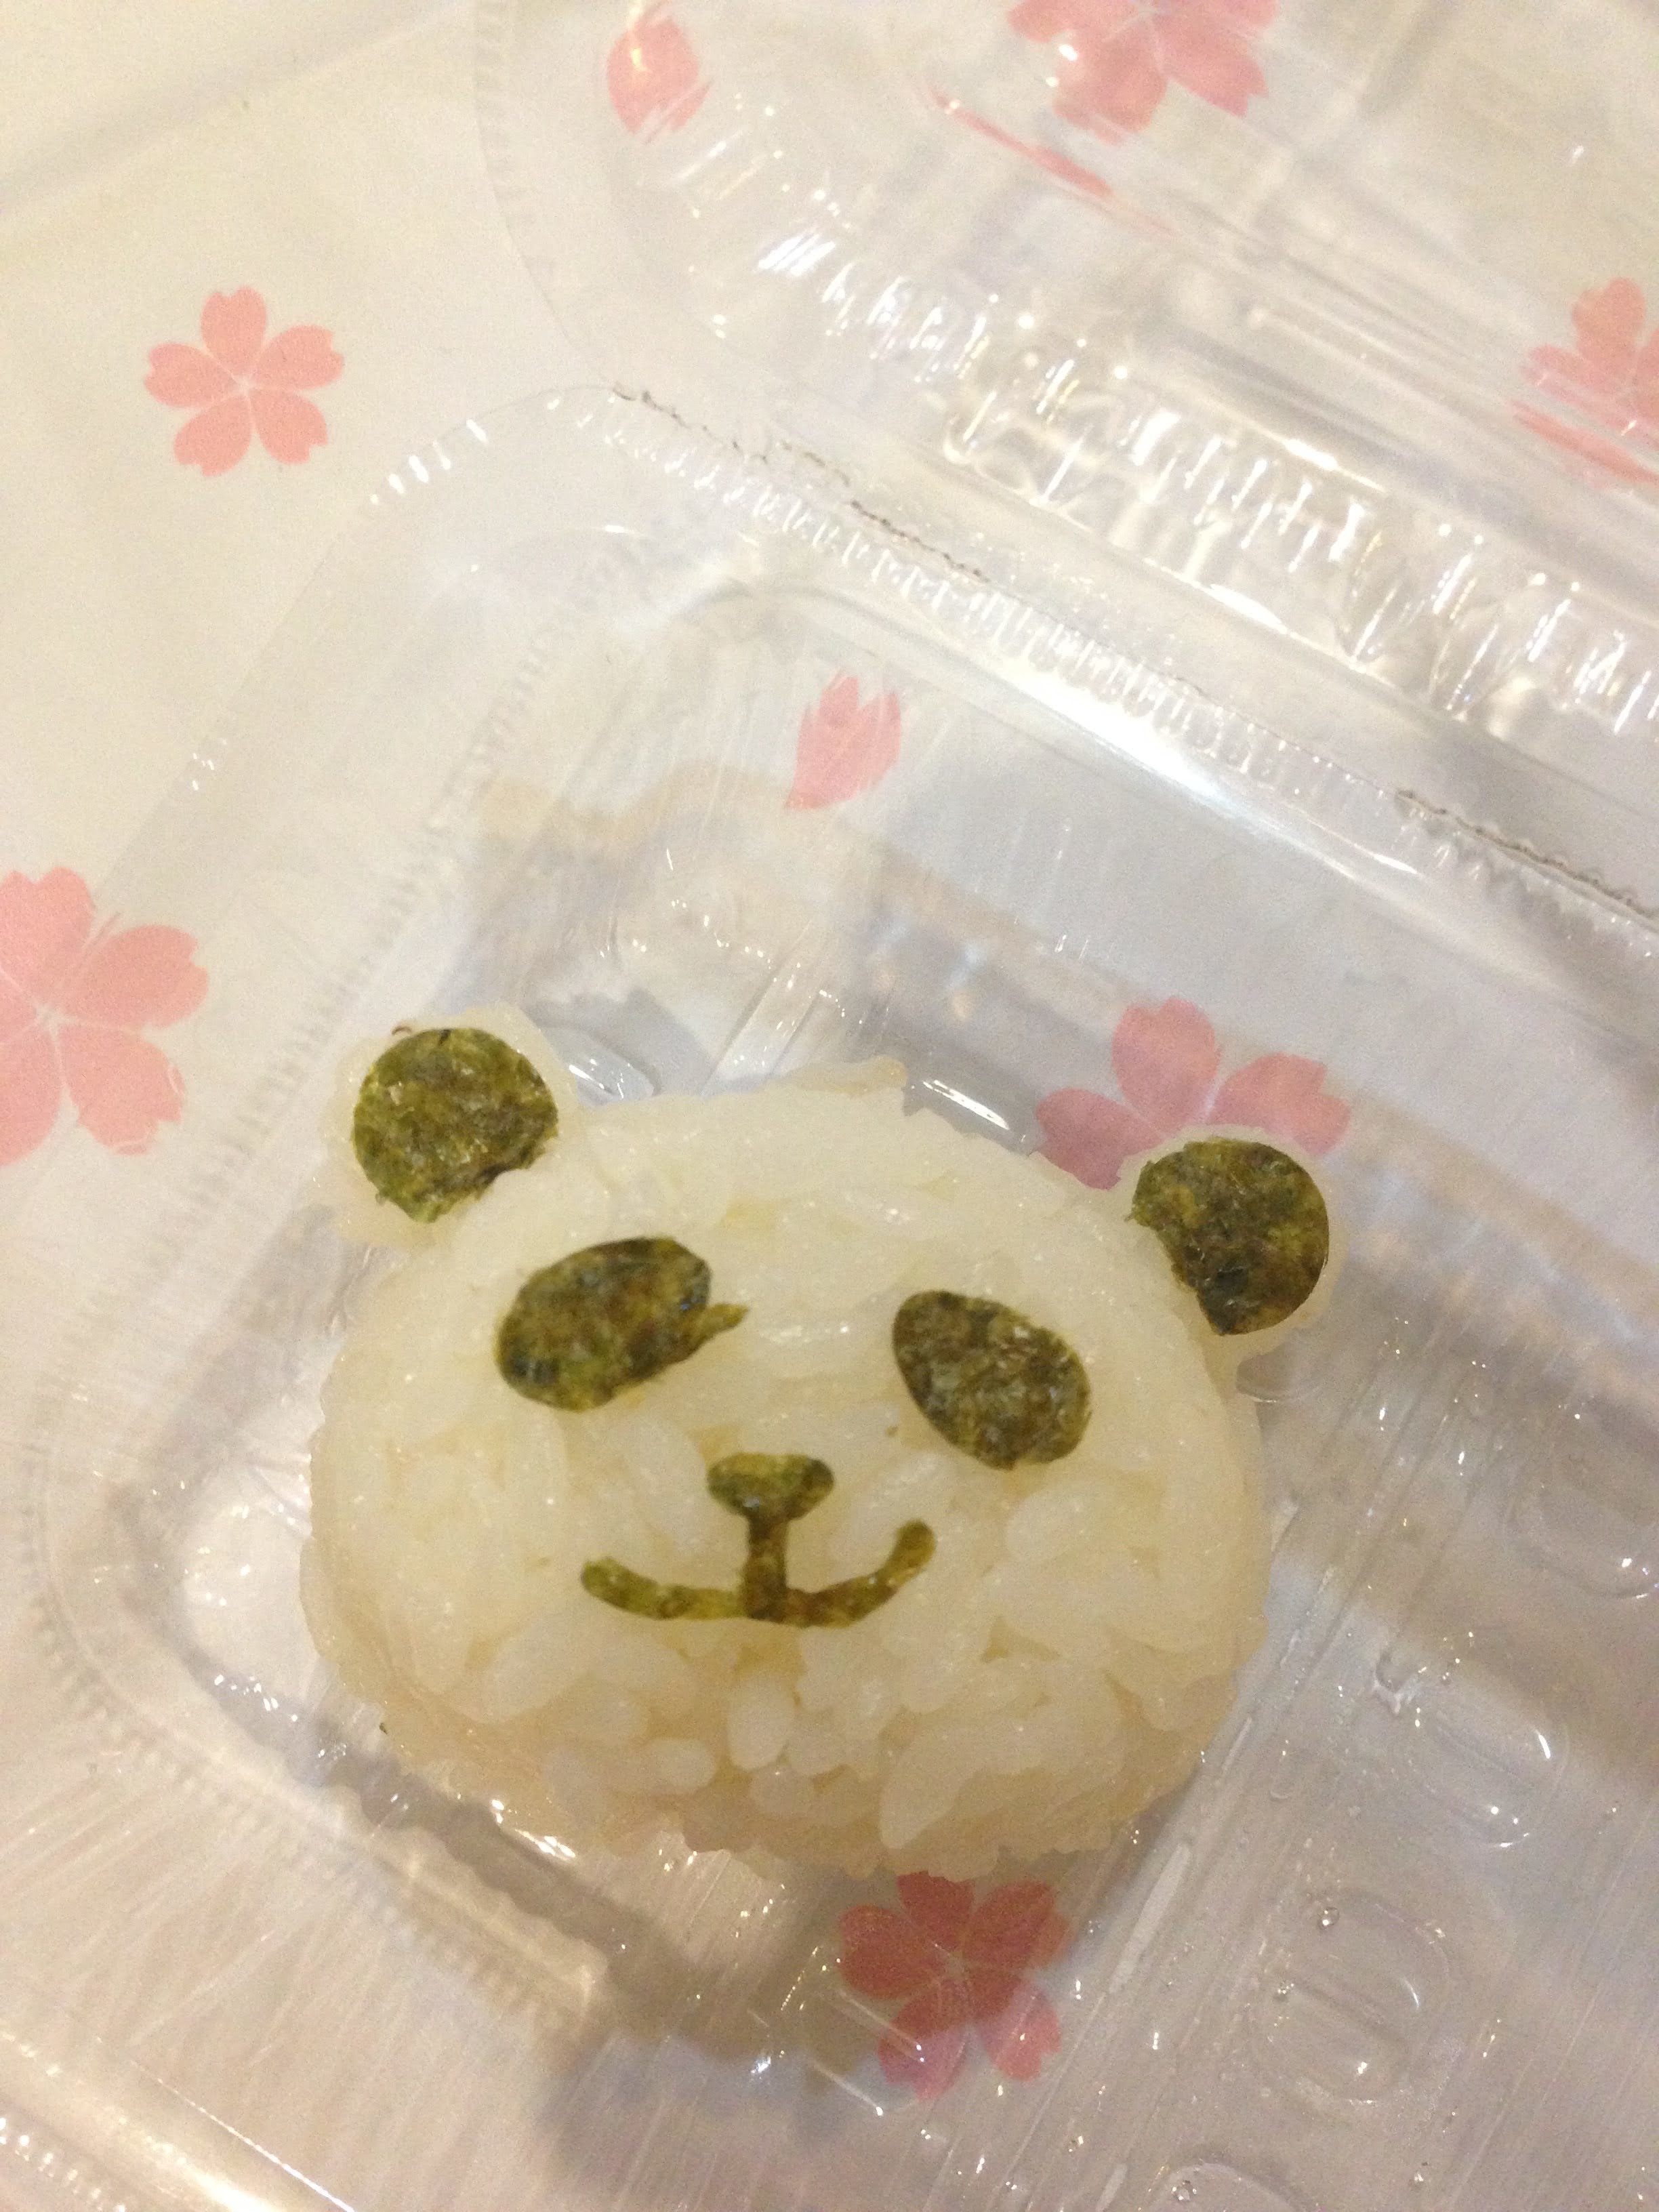 Rice with a panda face on it